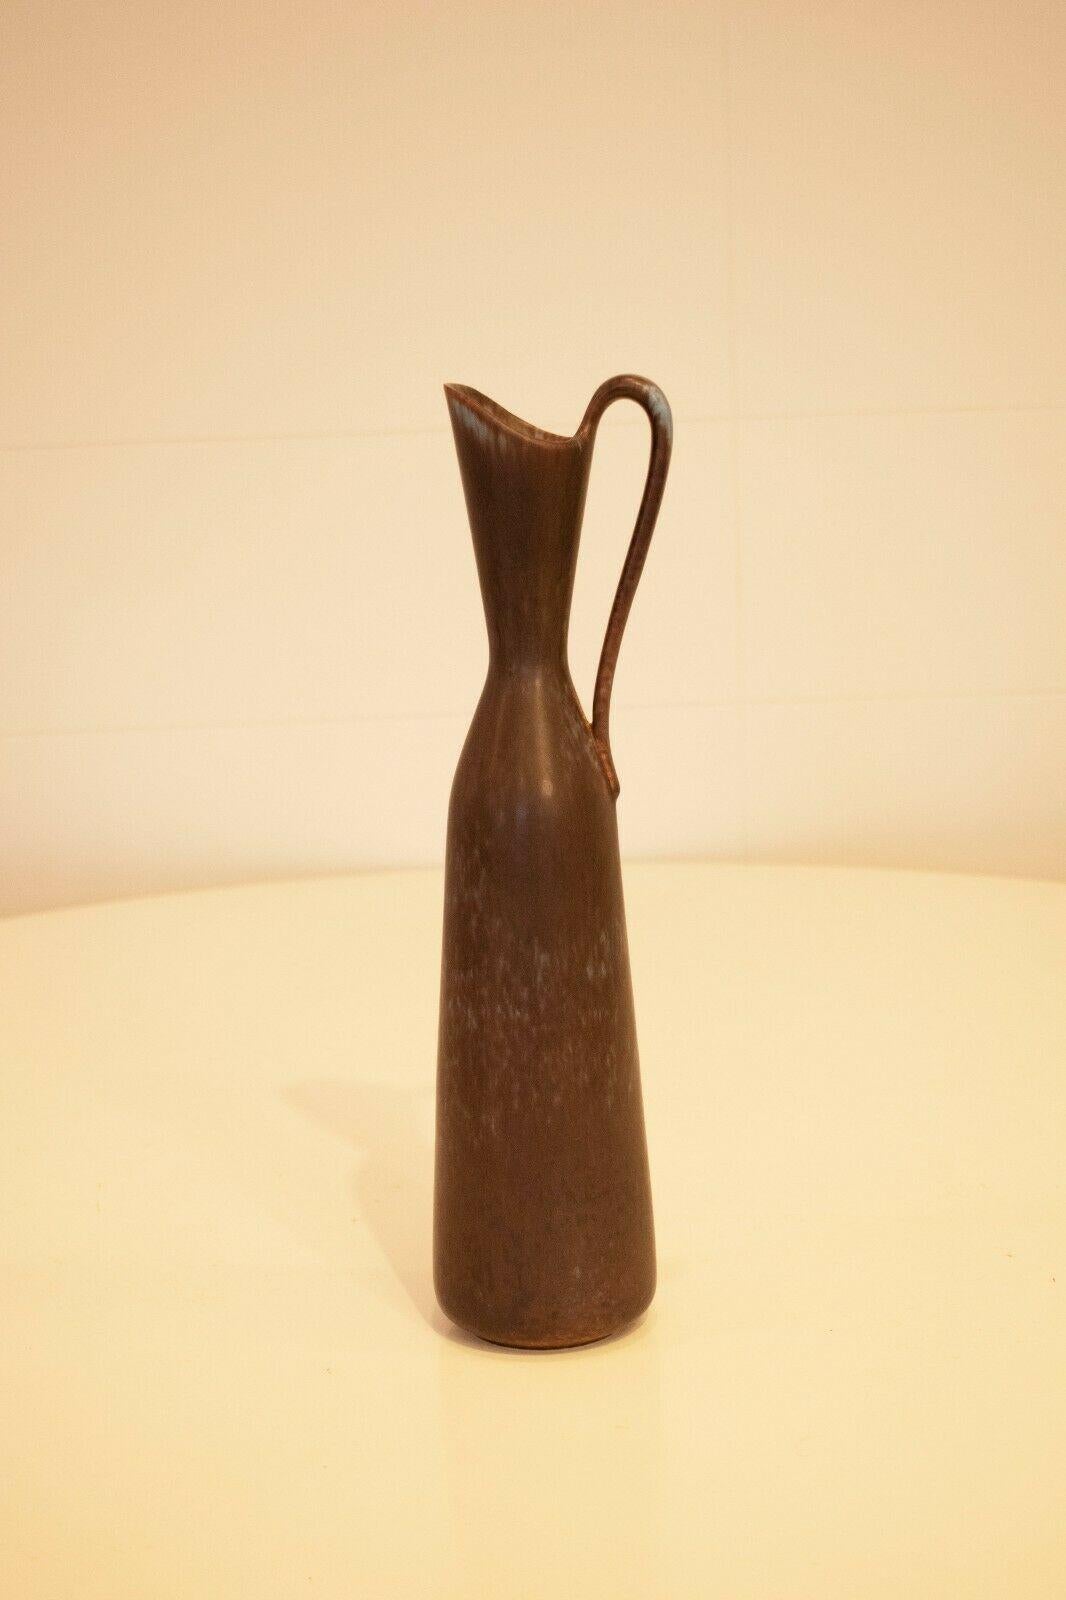 A beautiful vintage 1960's Swedish ceramic sculptural jug, designed by Gunner Nylund.

Glazed in a brown shade, with hints of blue throughout.

A truly beautiful, sculptural decorative piece.

On the base, the makers signature can be seen.

About